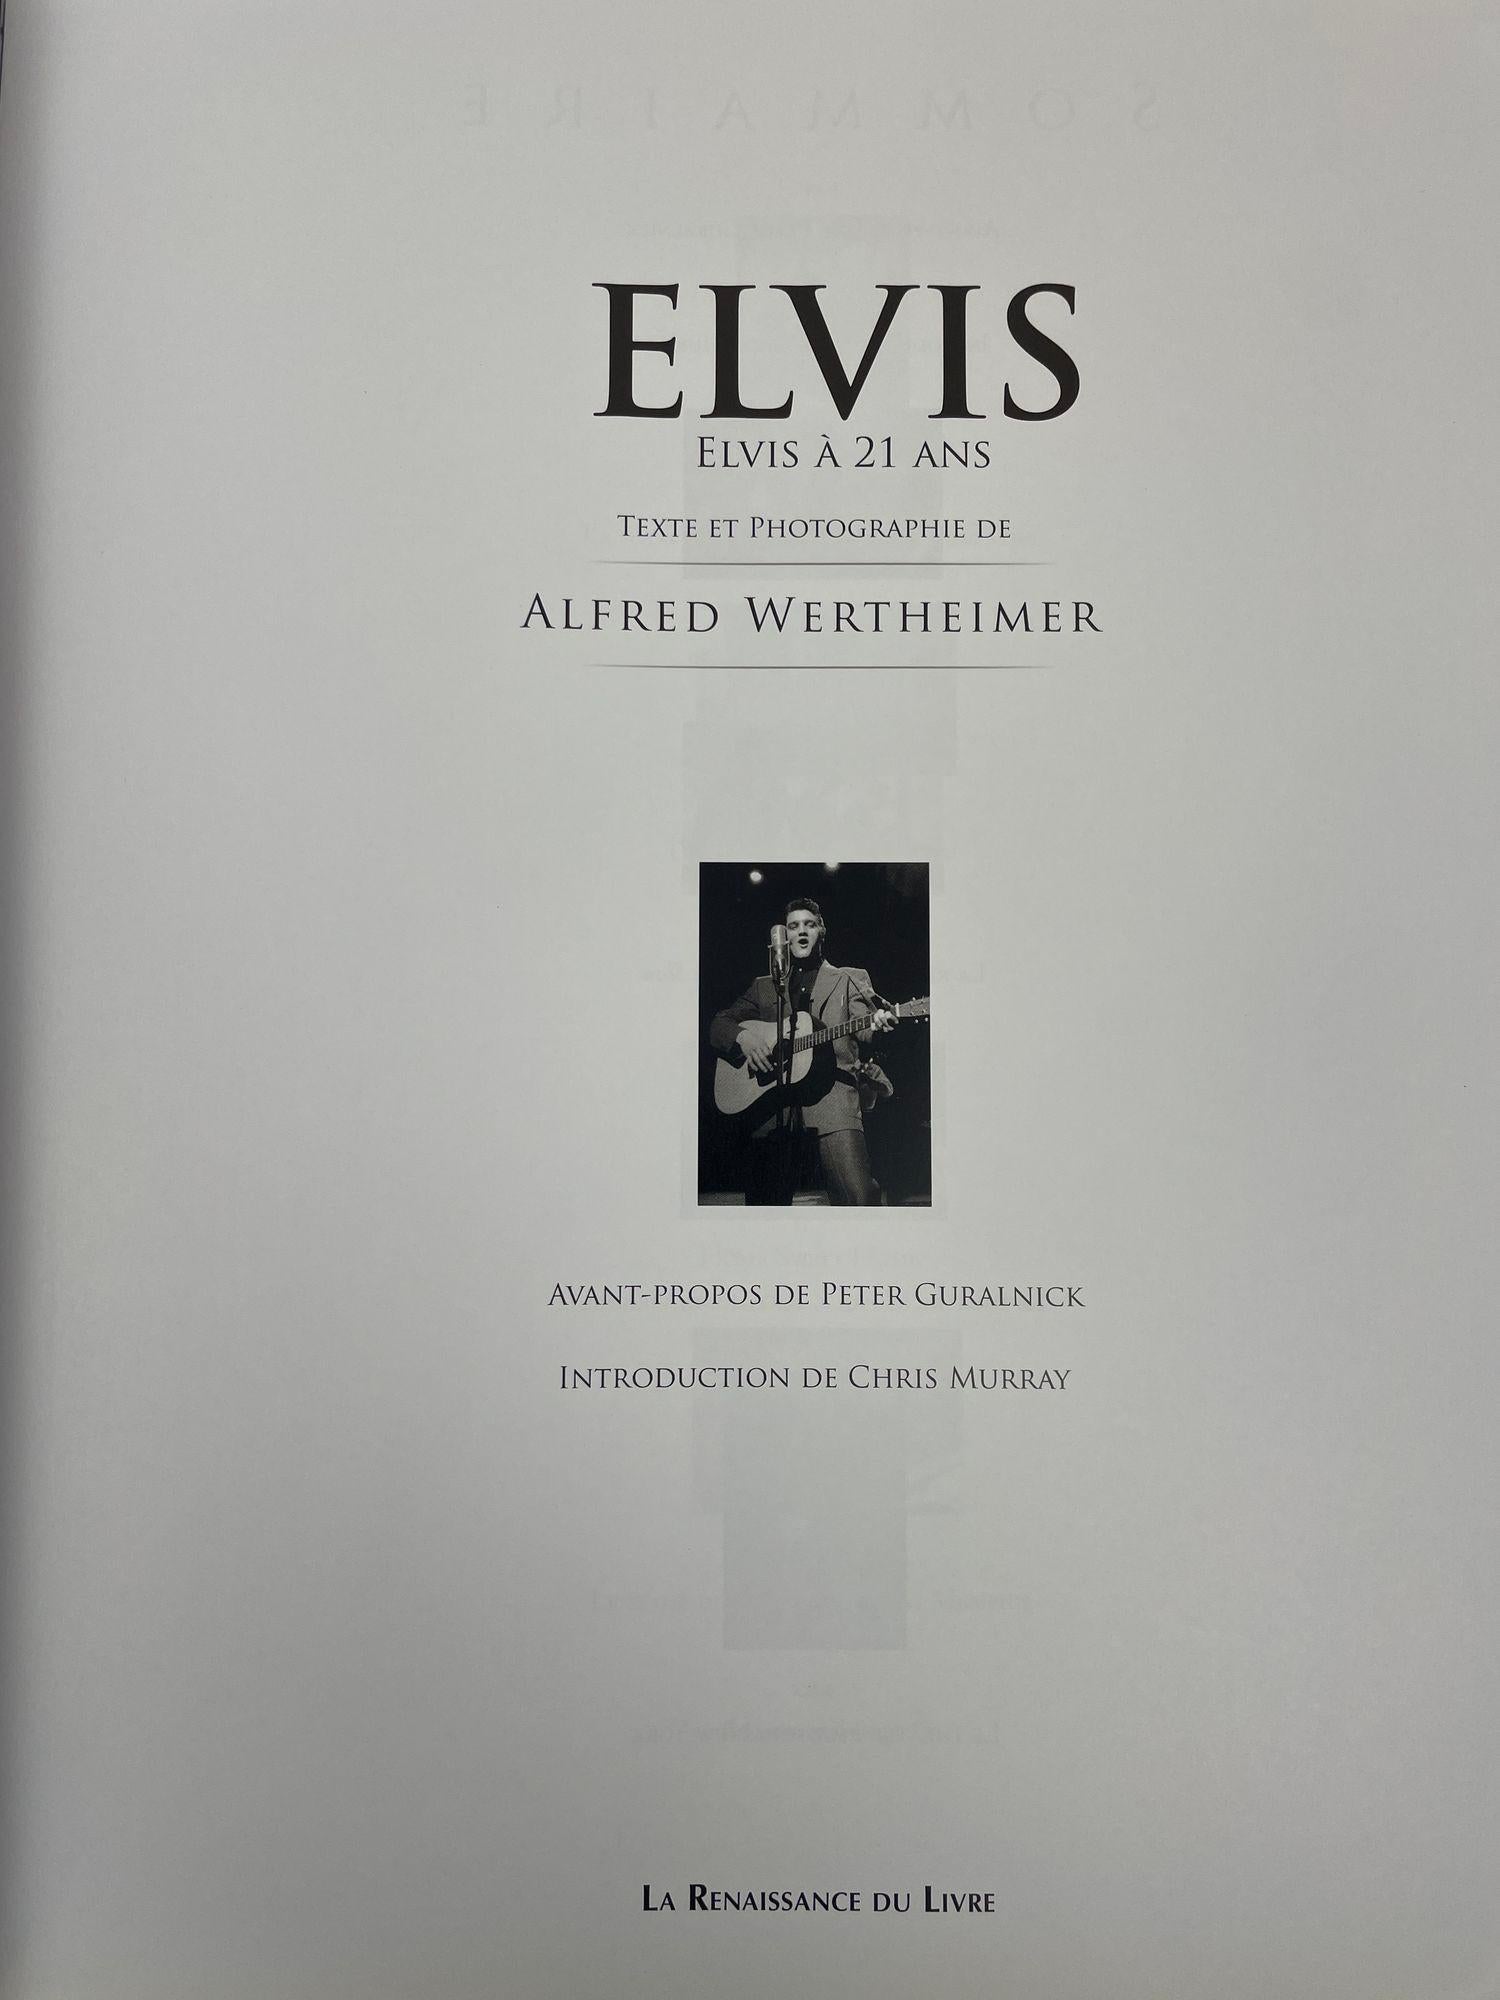 American Classical ELVIS The King Le King en devenir French edition Hardcover 1st Edition 2006 For Sale